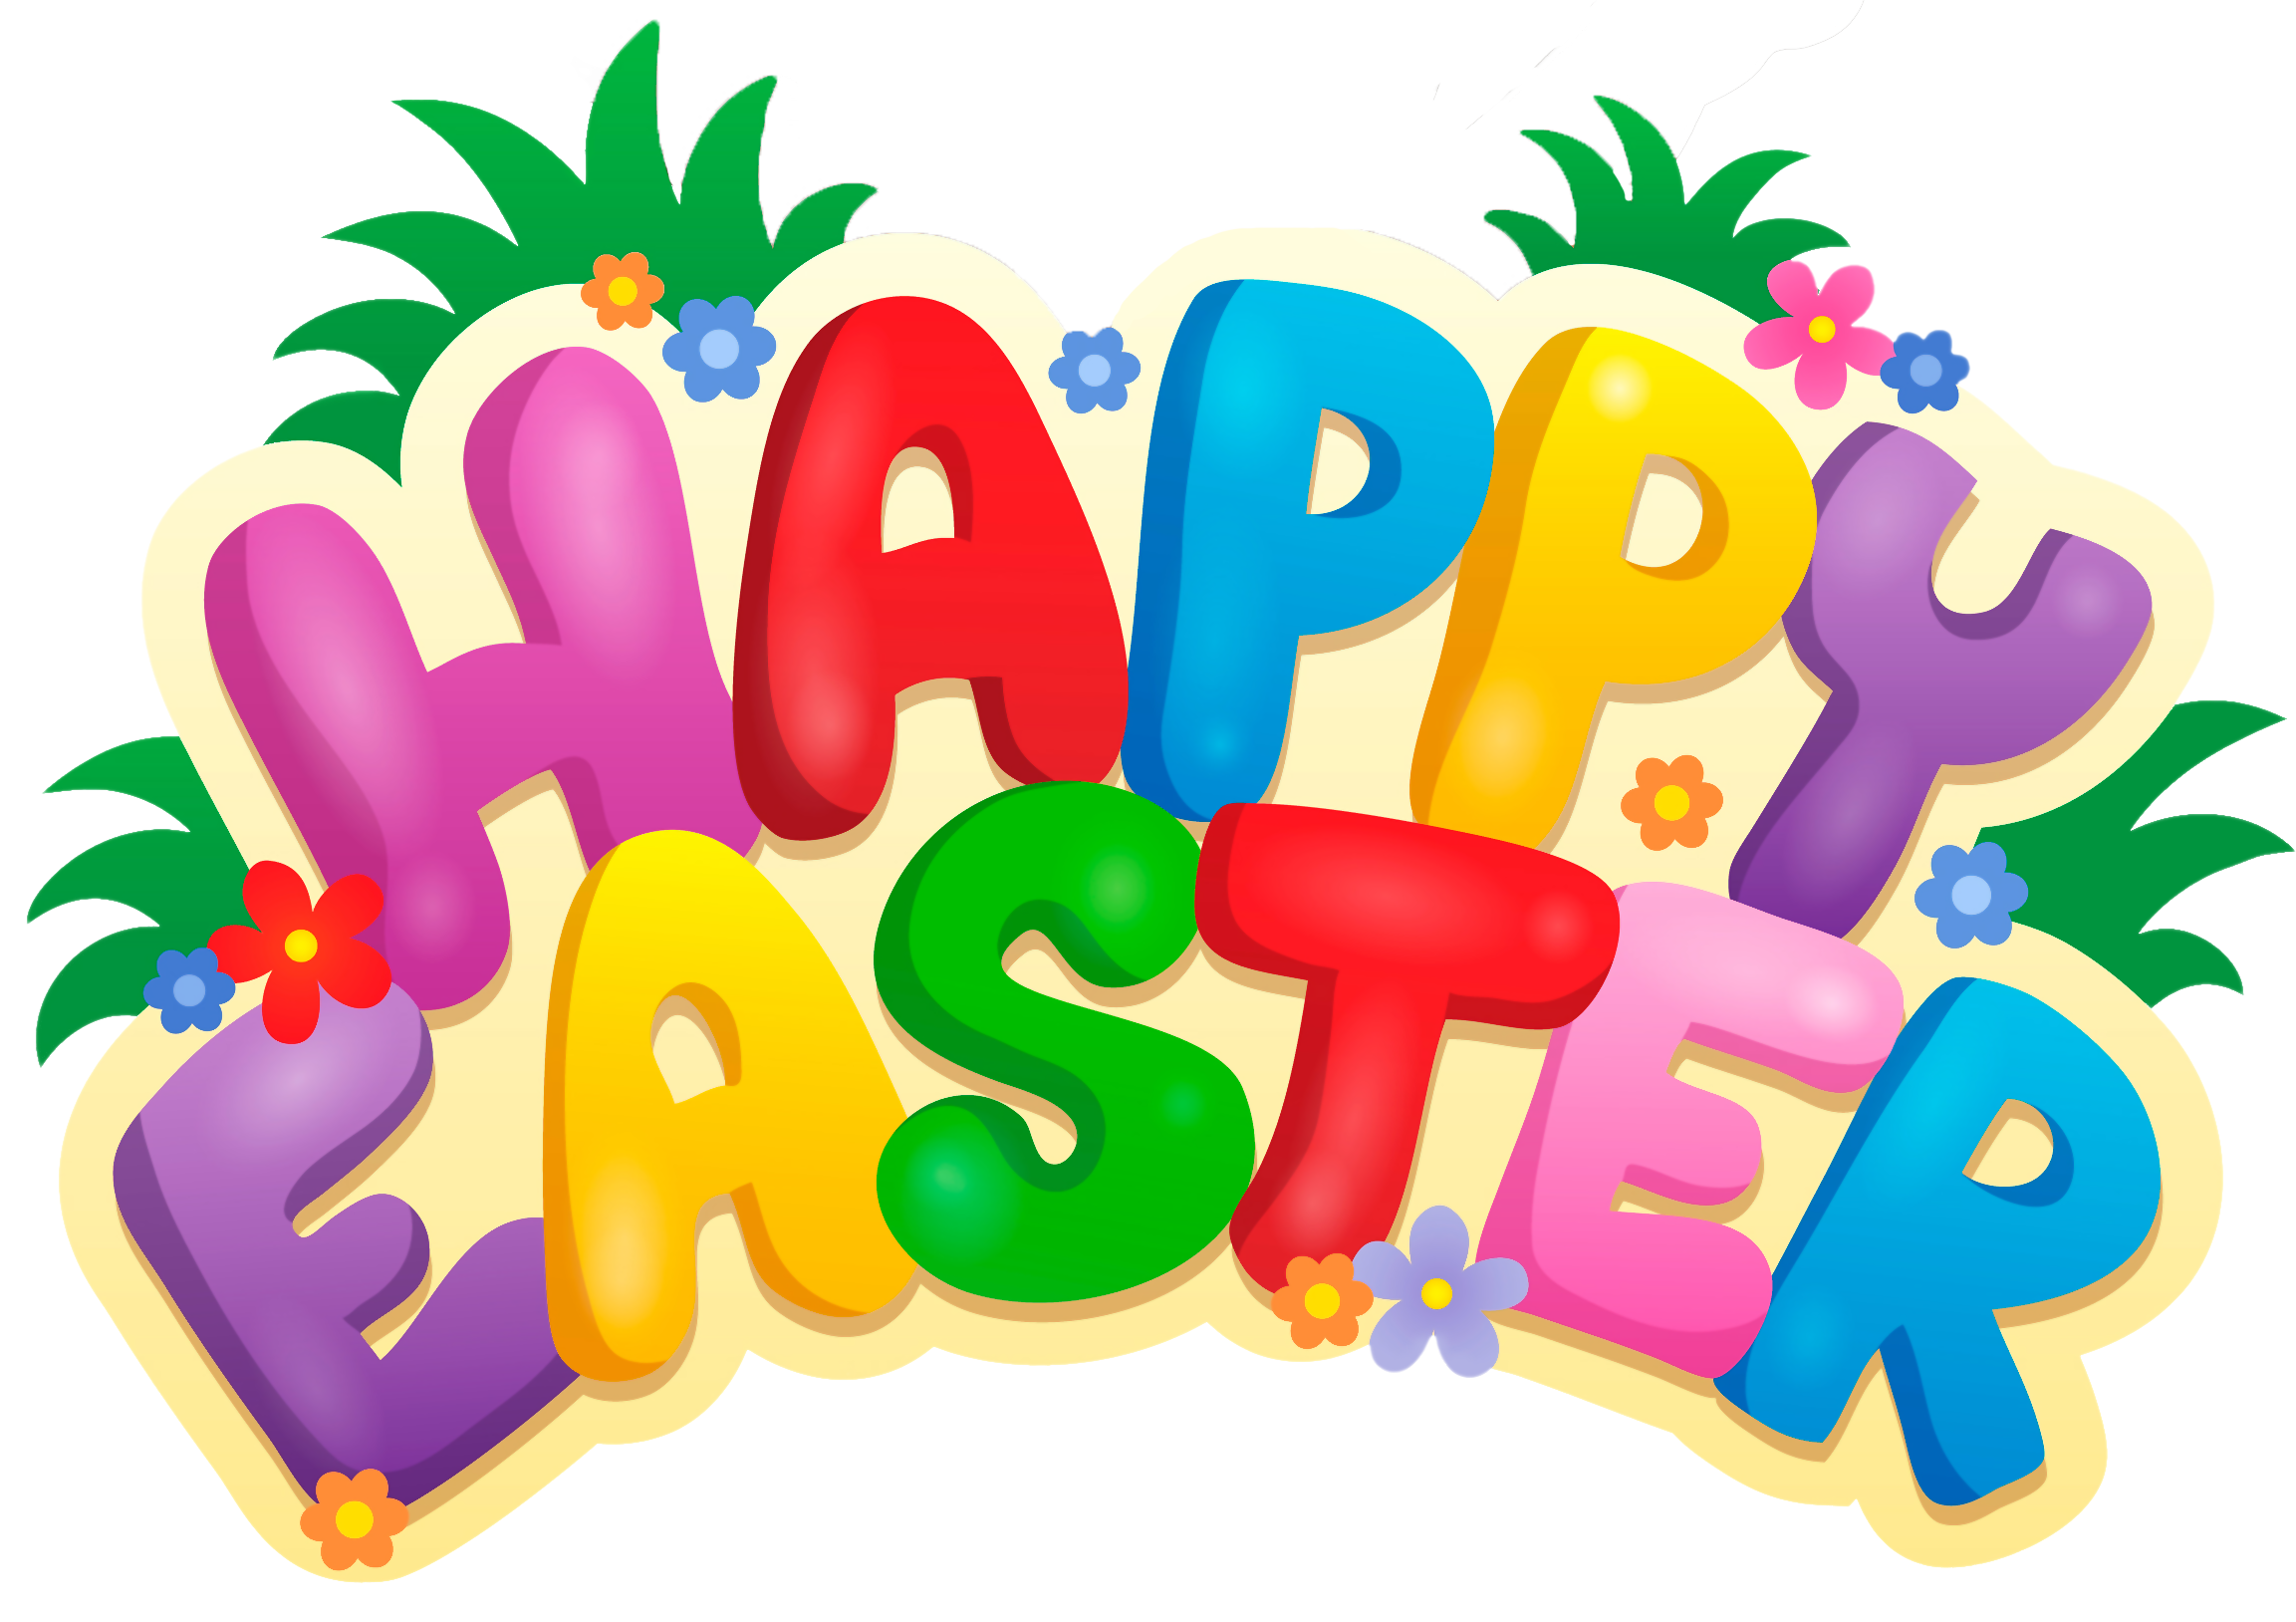 No Ecat Bus U0026 Uwf Trolley Service On Easter Sunday, April 16Th. Beach Trolleys Will Run On Easter Sunday From 5:00 Pm To 1:00 Am. - Easter Day, Transparent background PNG HD thumbnail